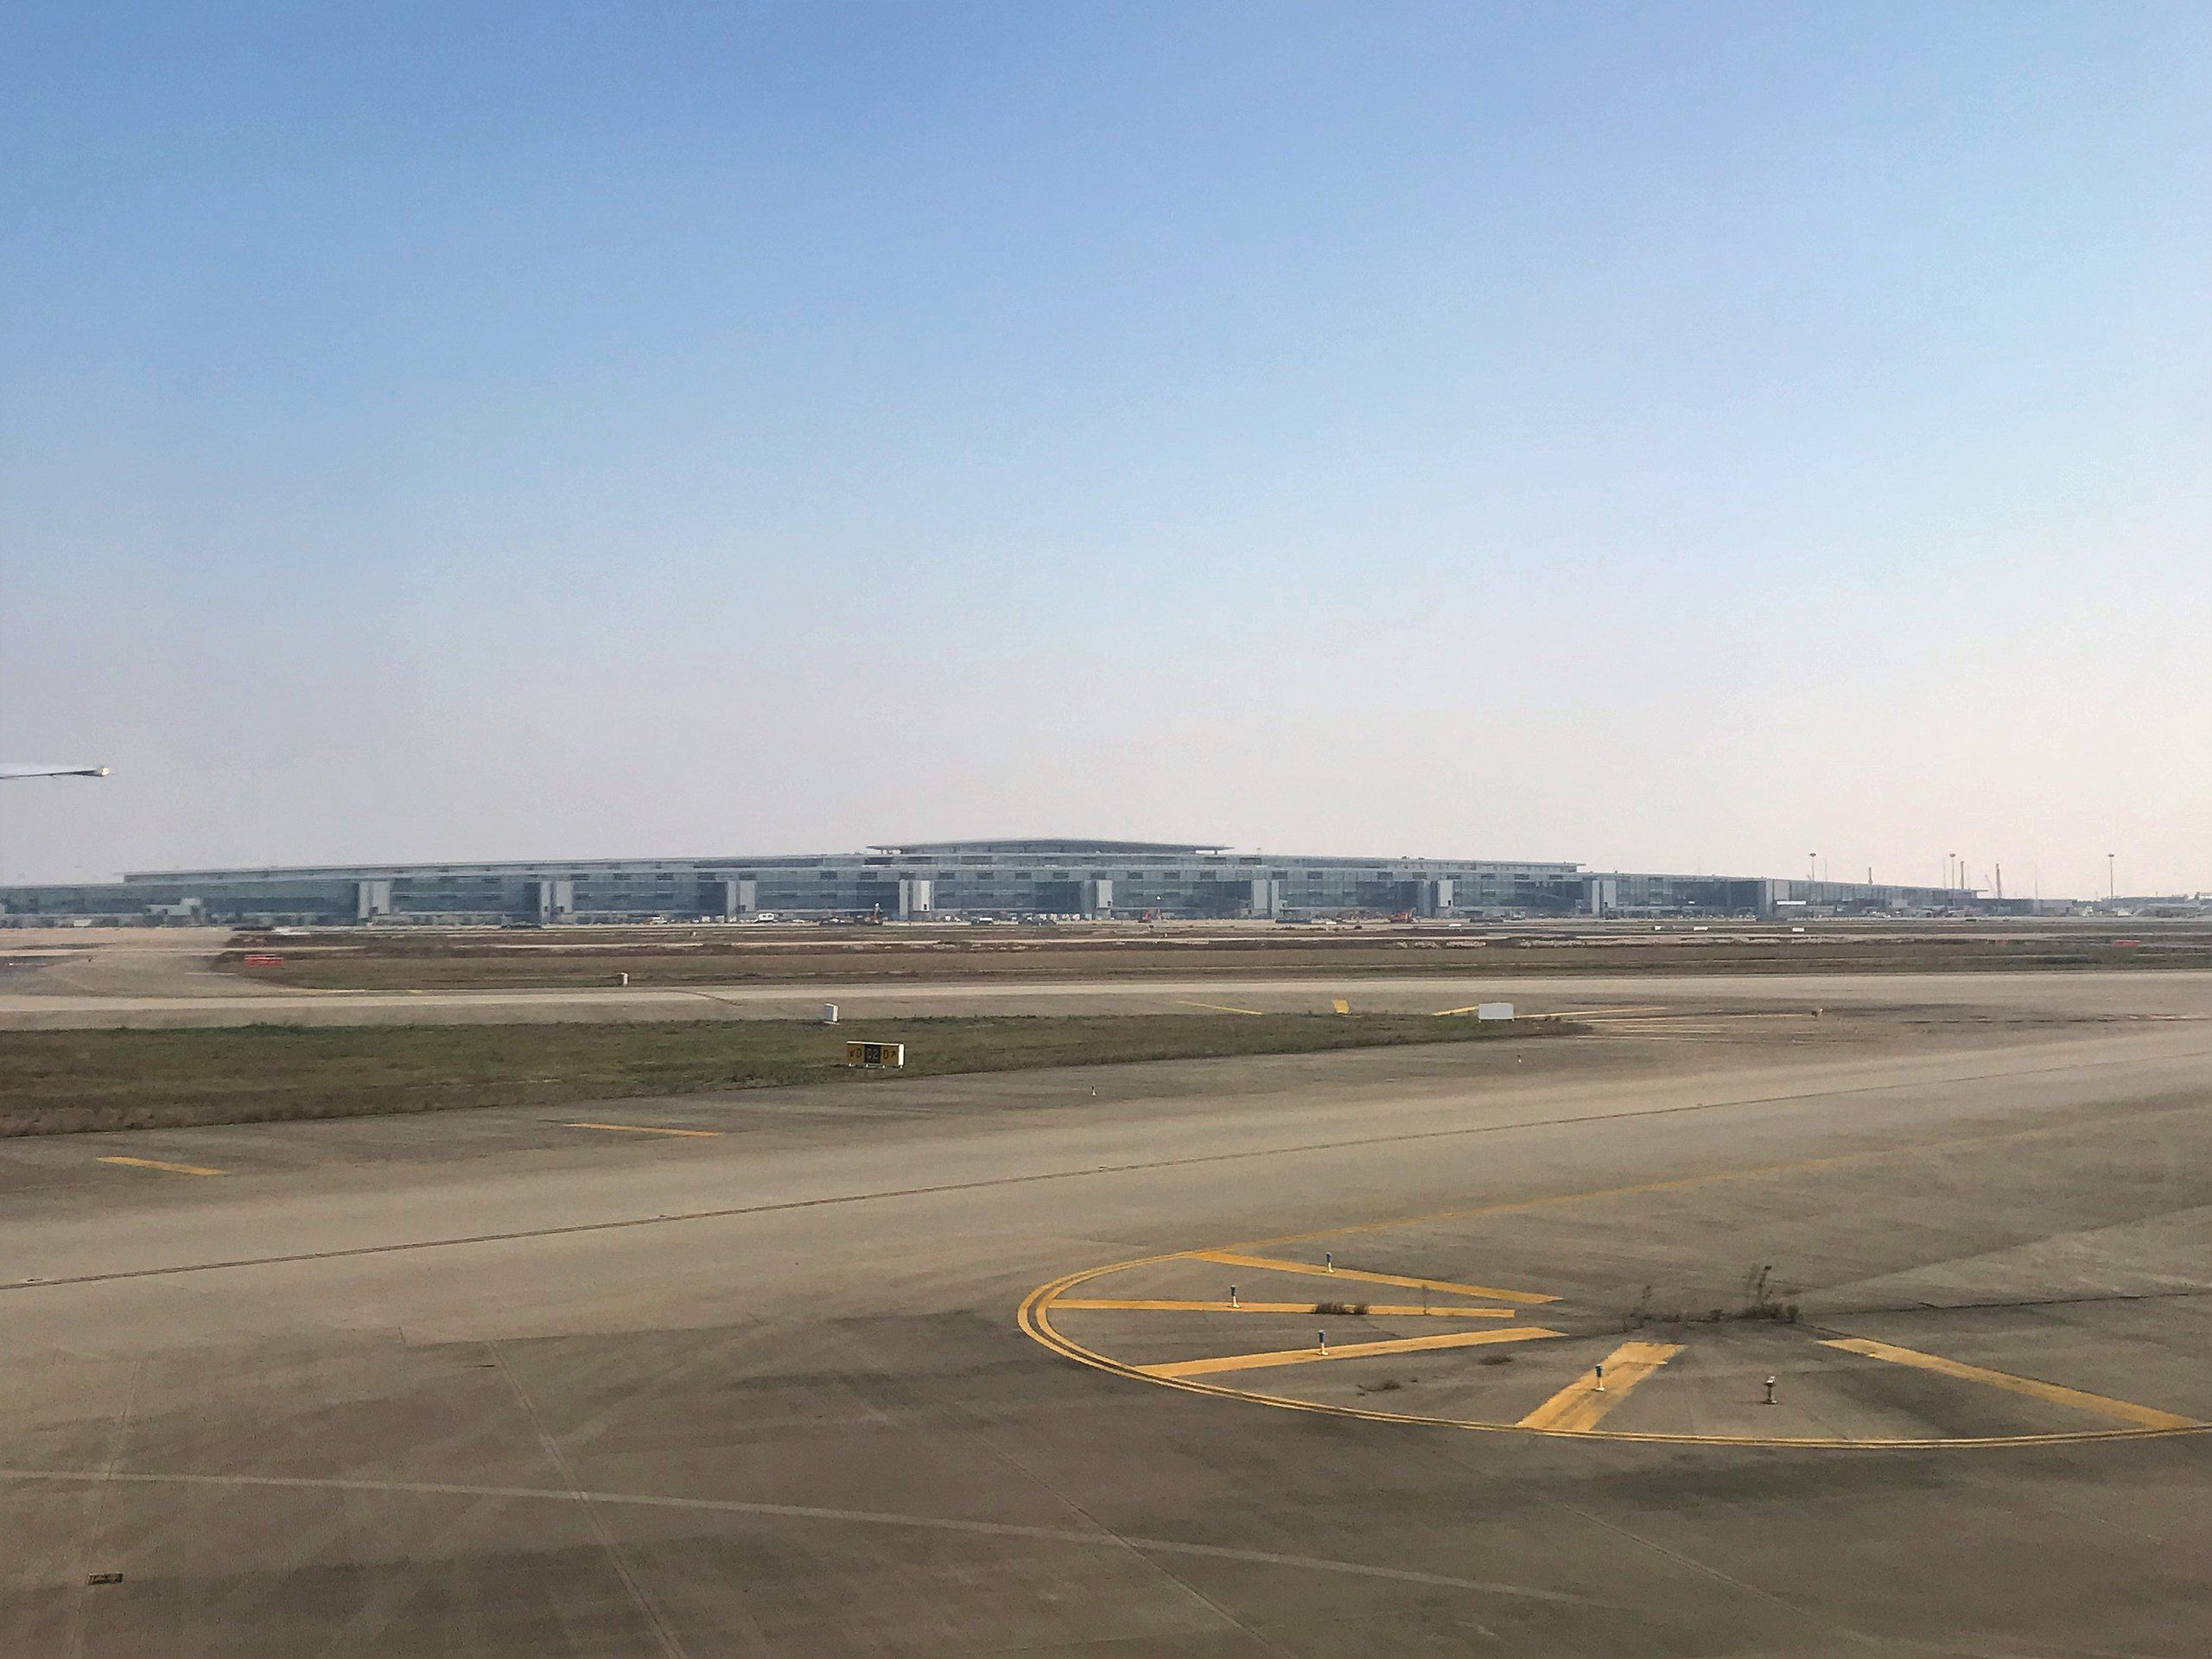 Outside view of the Shanghai Pudong Satellite Terminal.